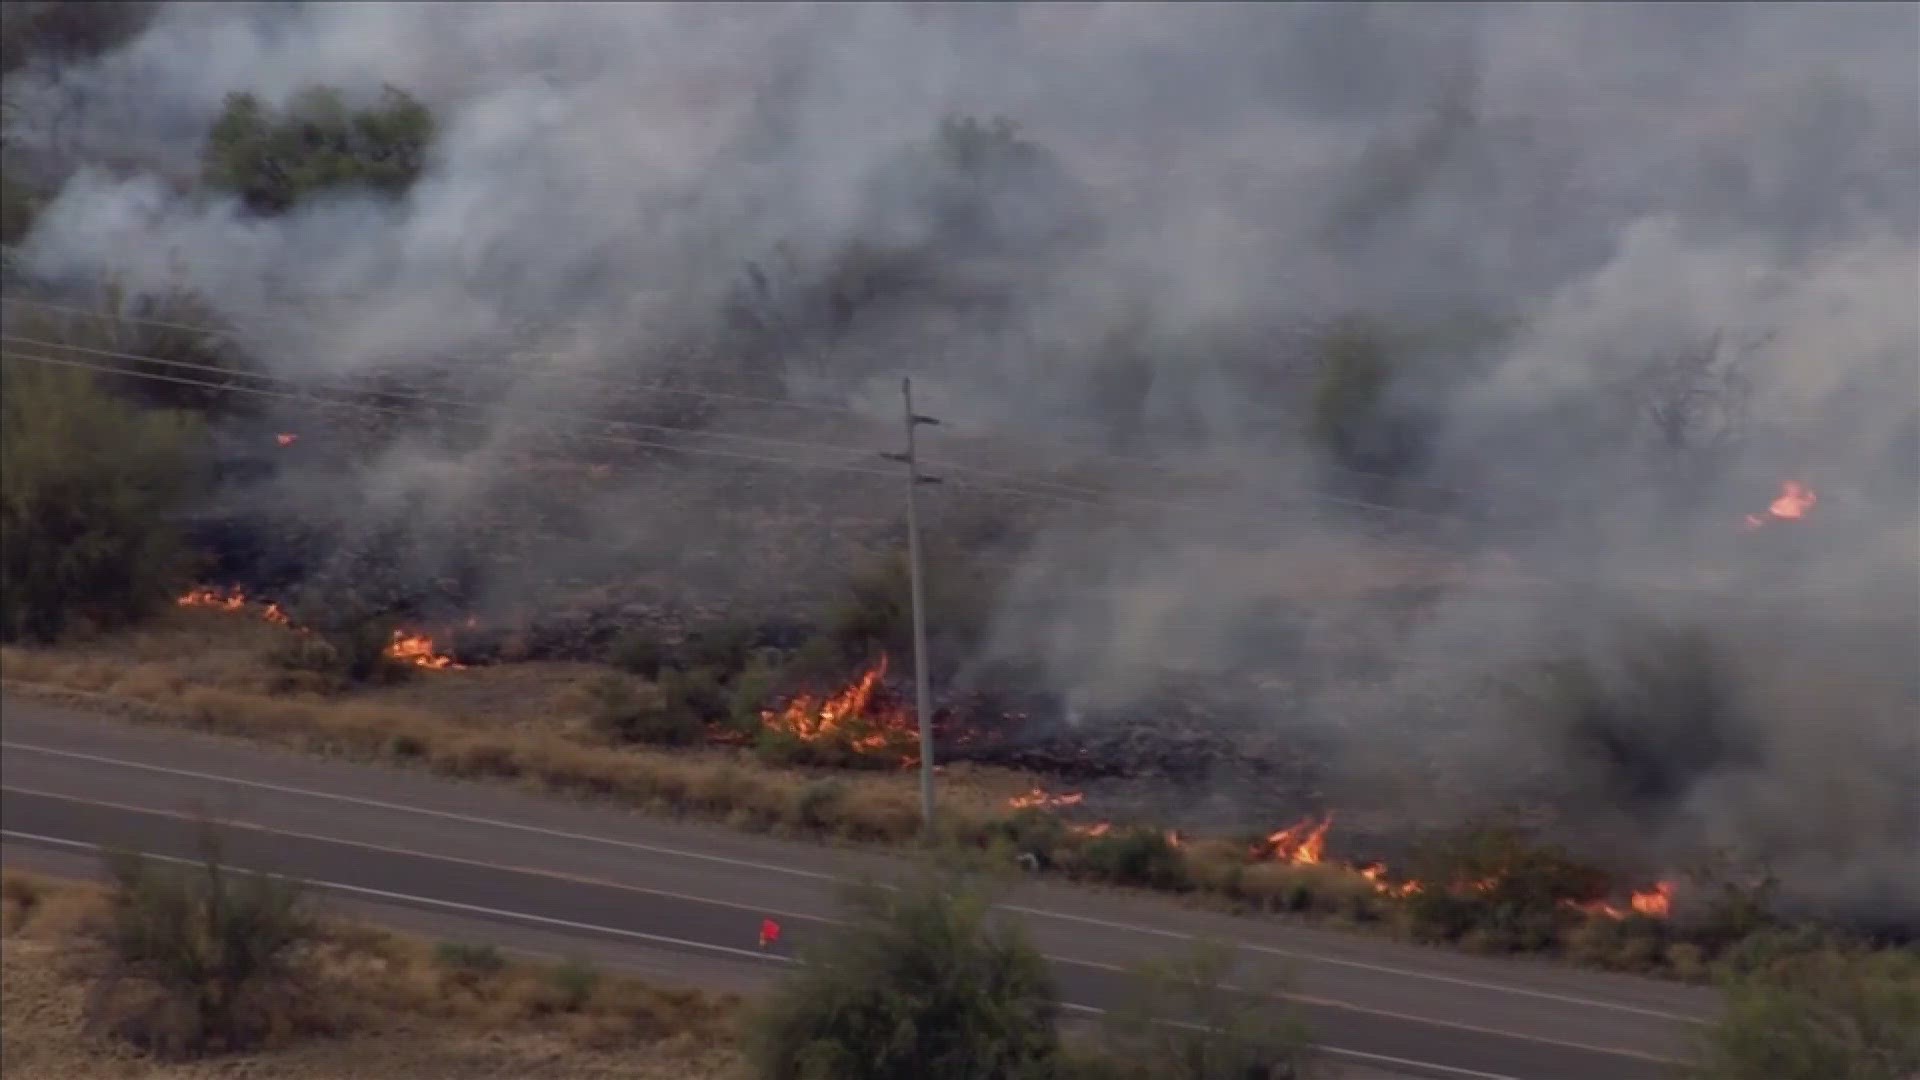 The fire broke out Wednesday near 321st Avenue and Baseline Road which is south of Interstate 10 and west of Buckeye